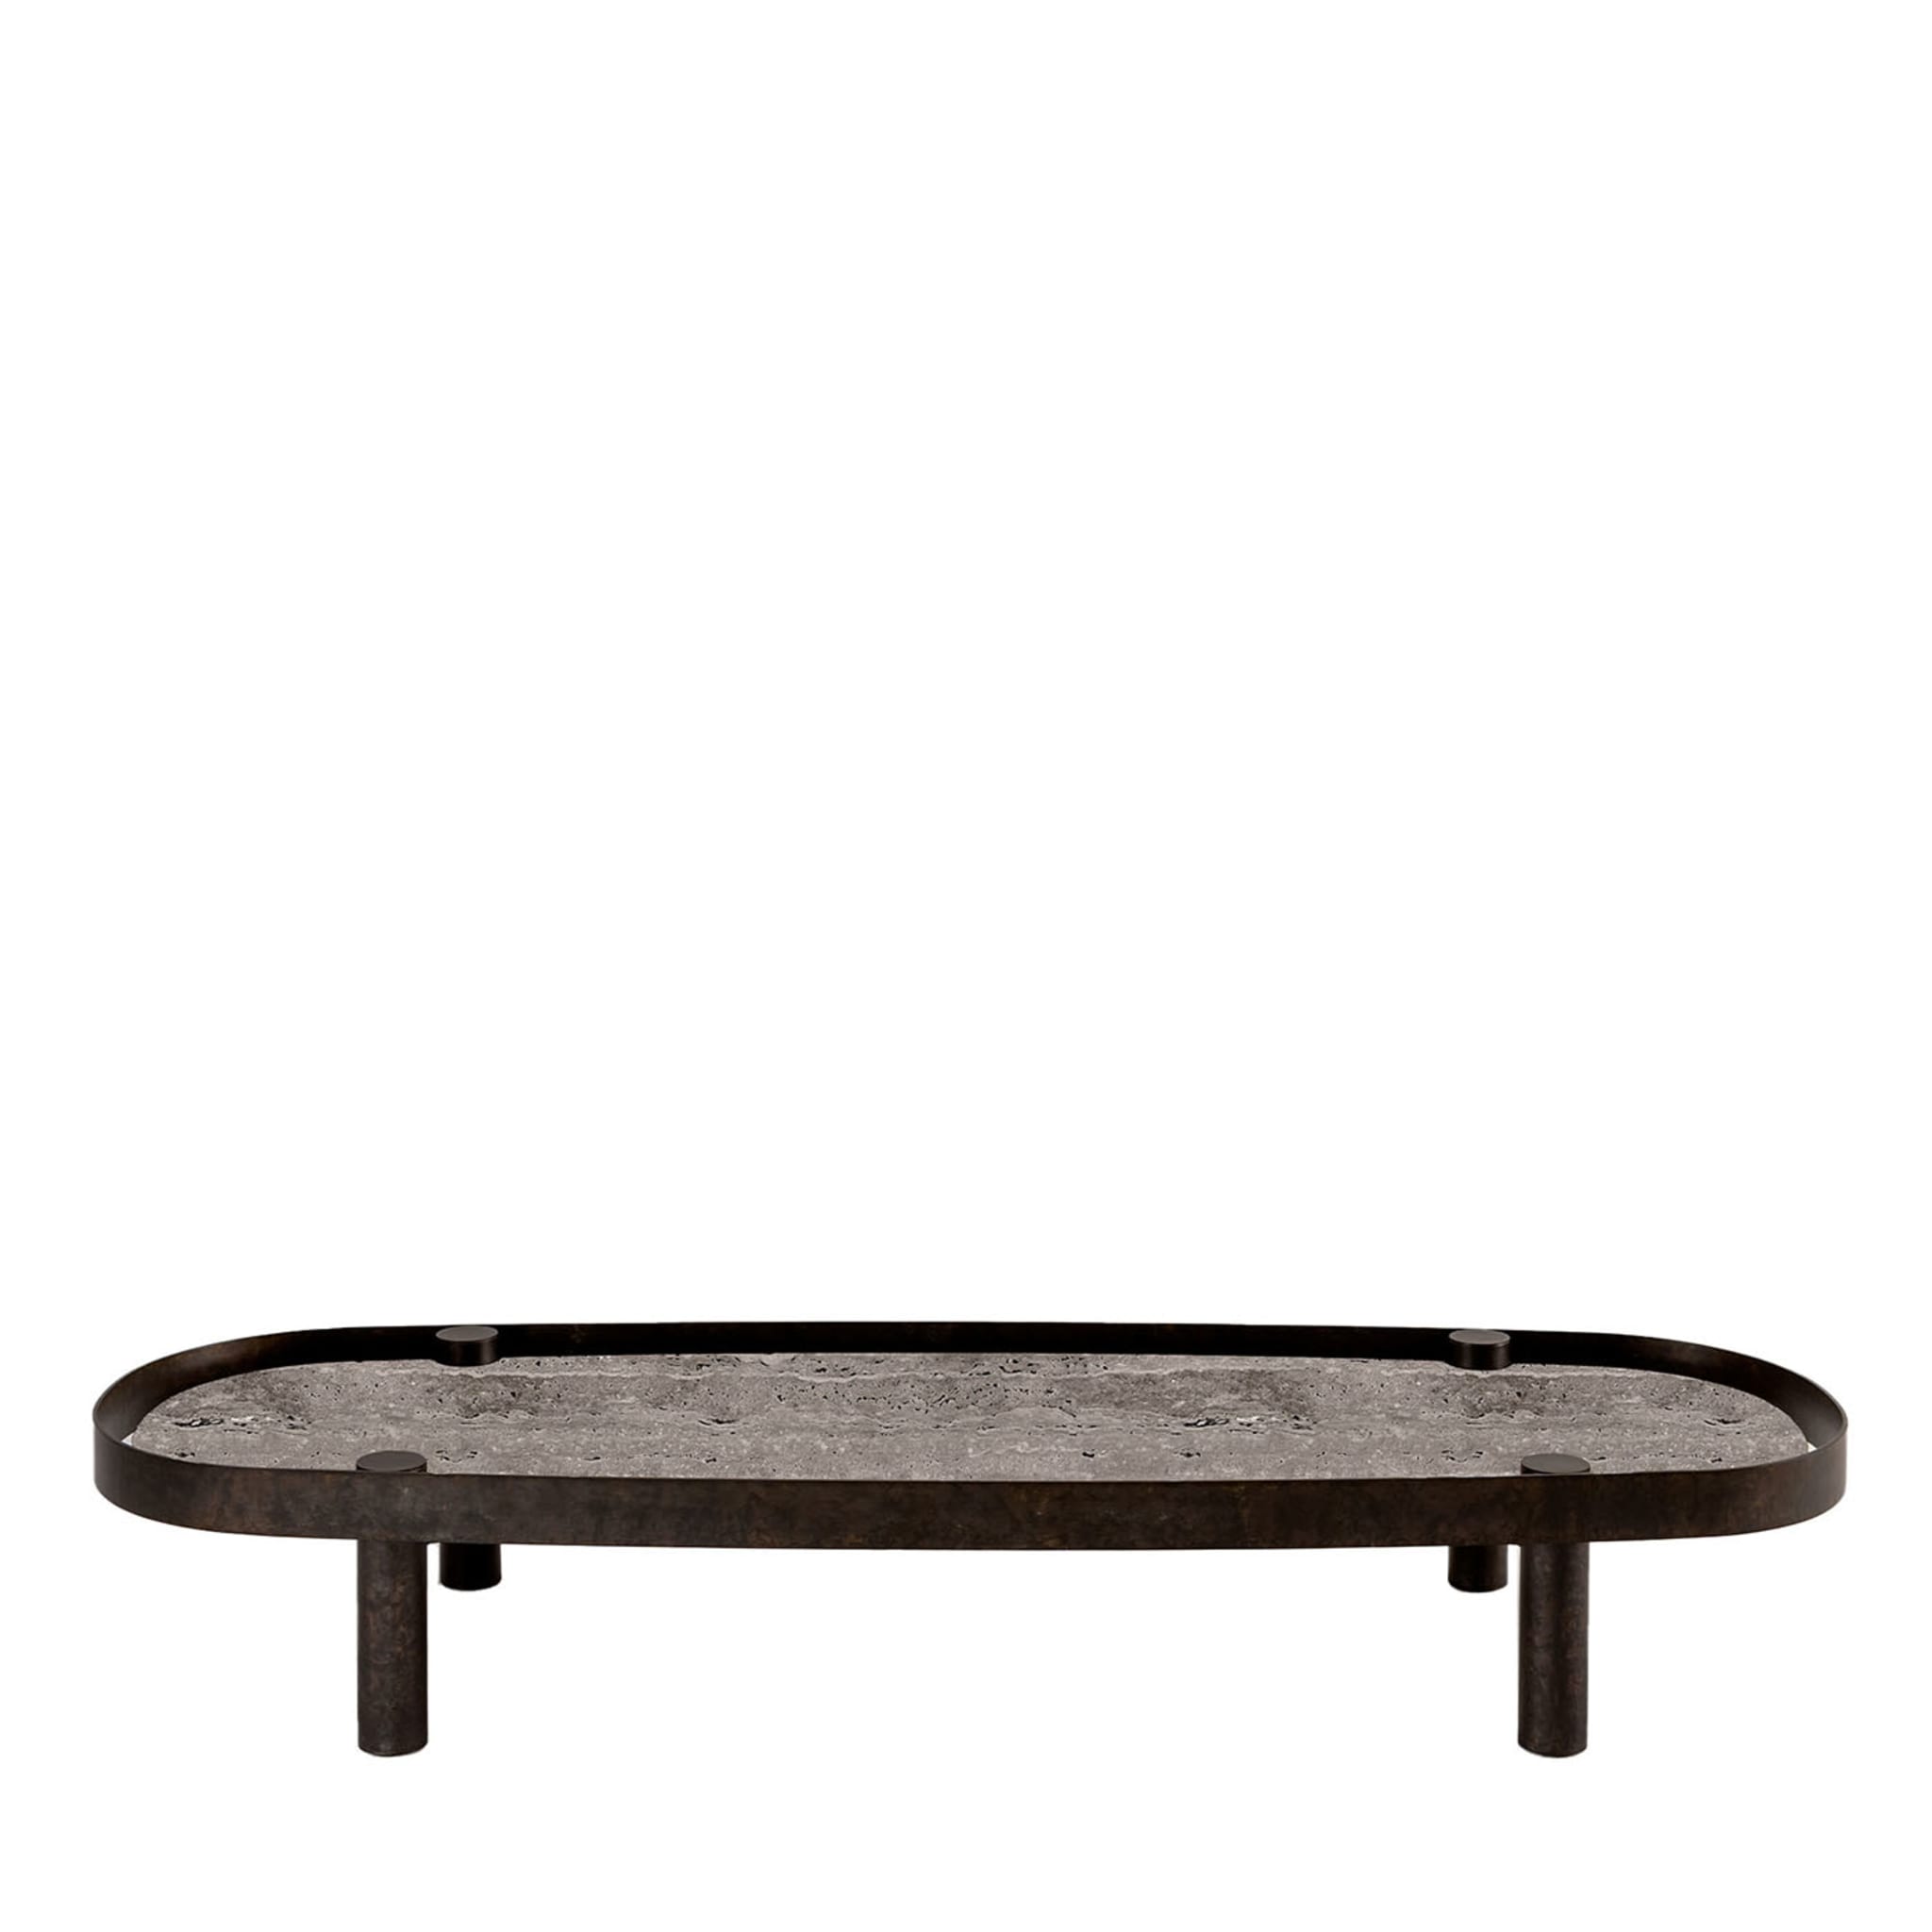 "Tray" Low Travertino Marble Coffe Table - Main view